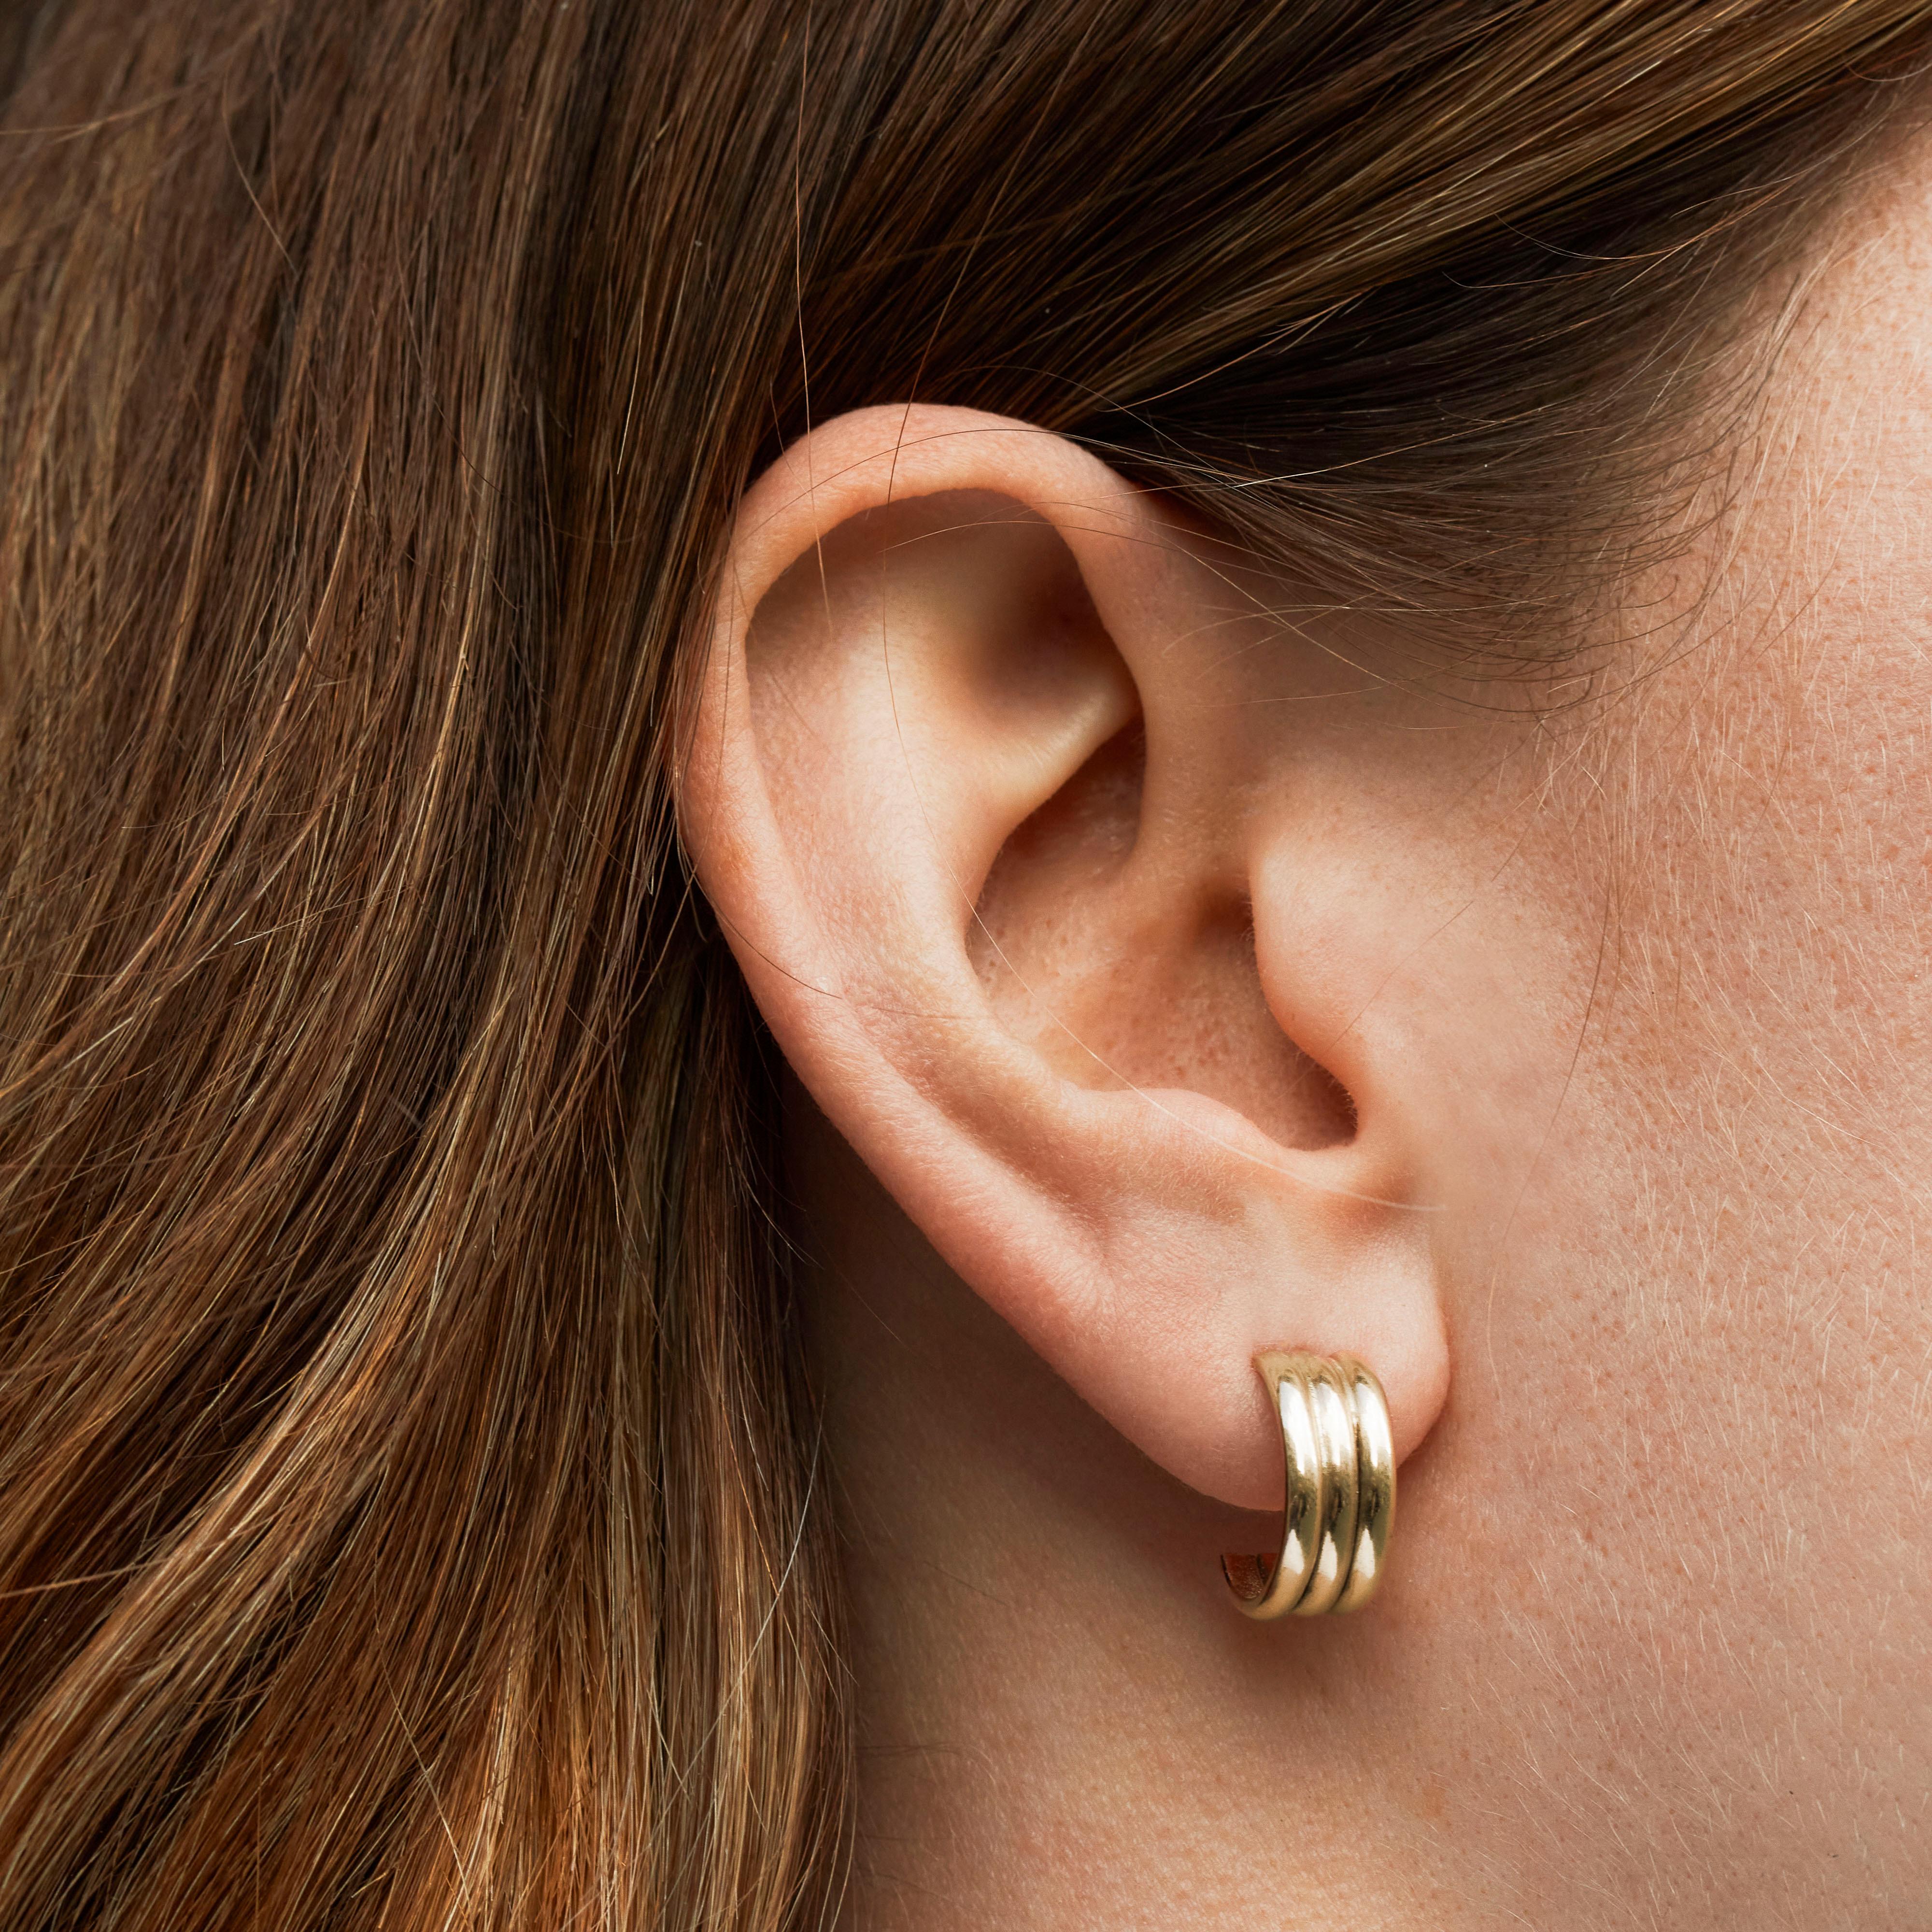 A chunkier style of hoop earring, the trio hoops are crafted to create a hoop earring with a grooved surface effect. Perfect for mixing with other hoop earrings as well as wearing on their own to elevate a casual everyday look.

The Trio Hoop